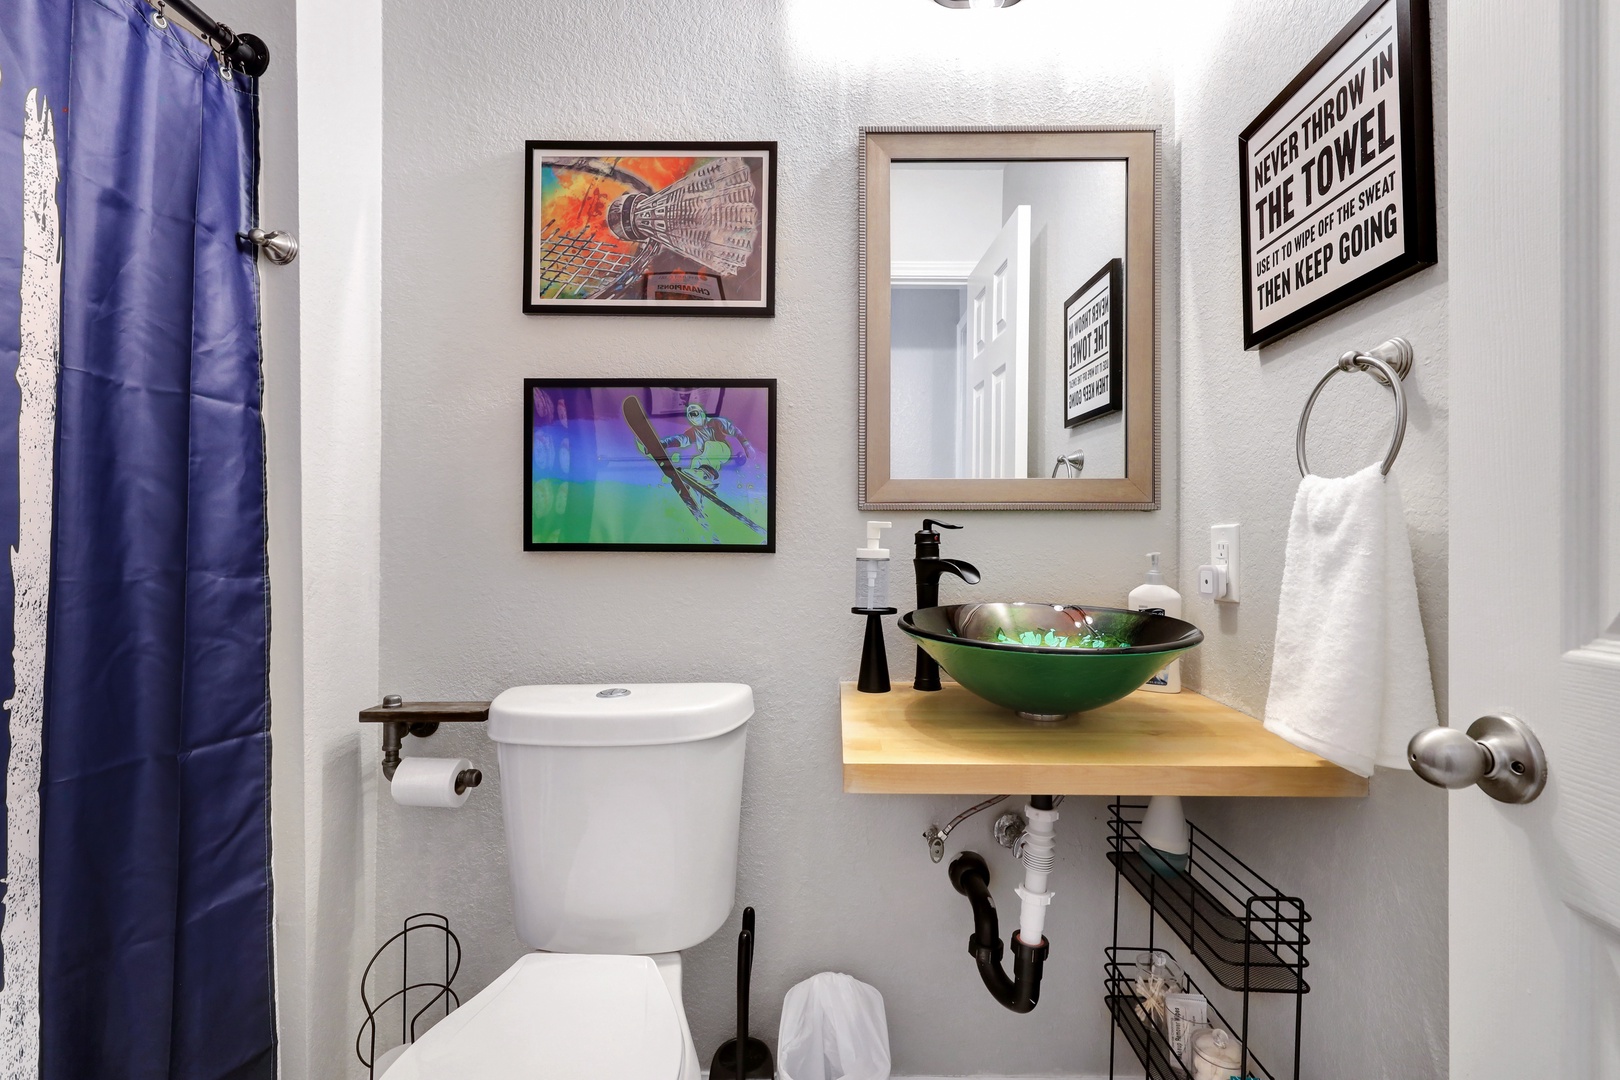 This first-floor full bath showcases a chic vanity & shower/tub combo